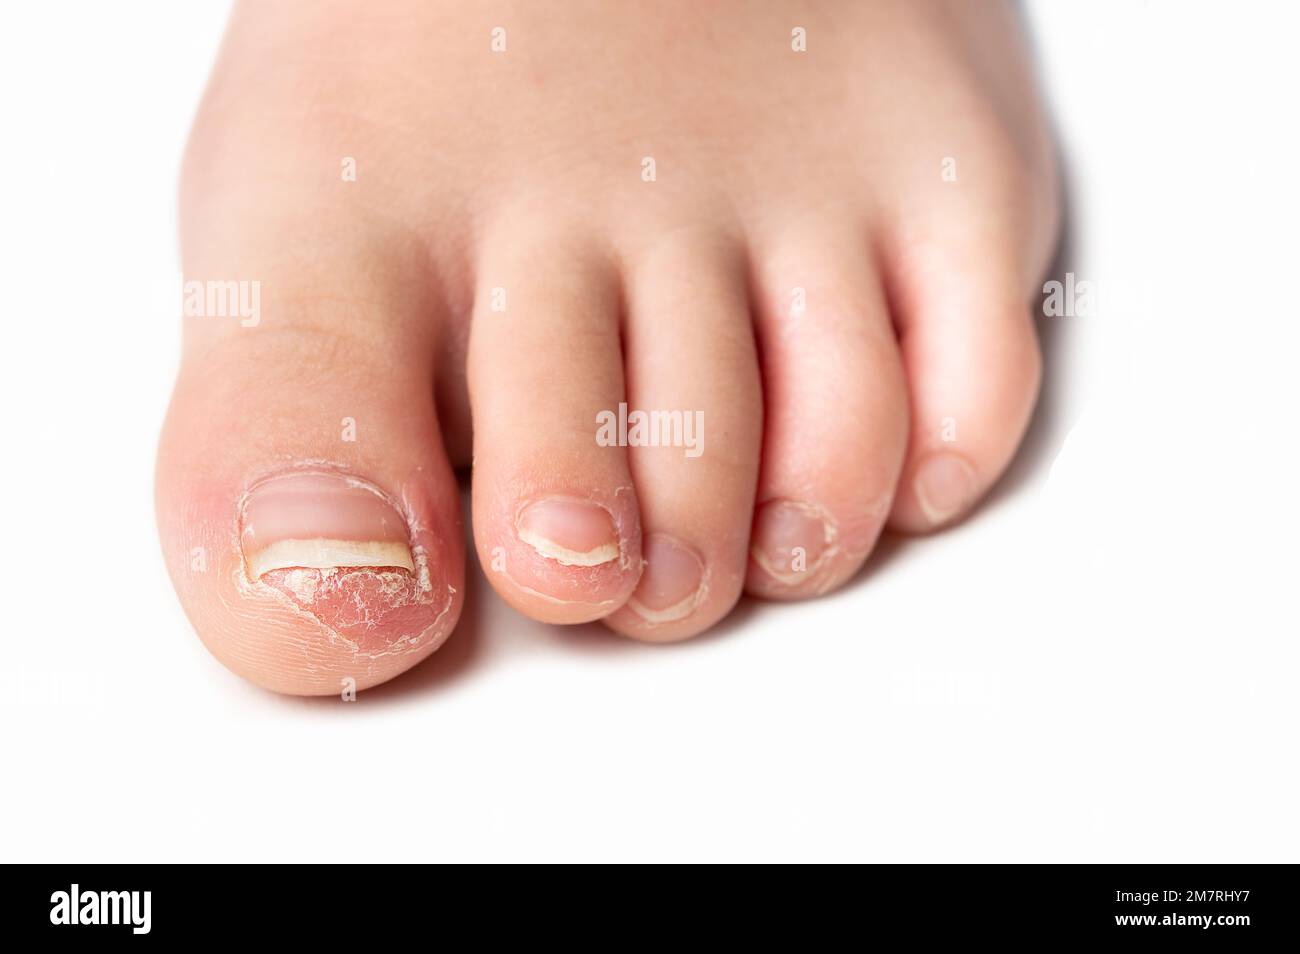 Athlete's foot (Tinea pedis): Prevention and Treatment | The Foot Hub